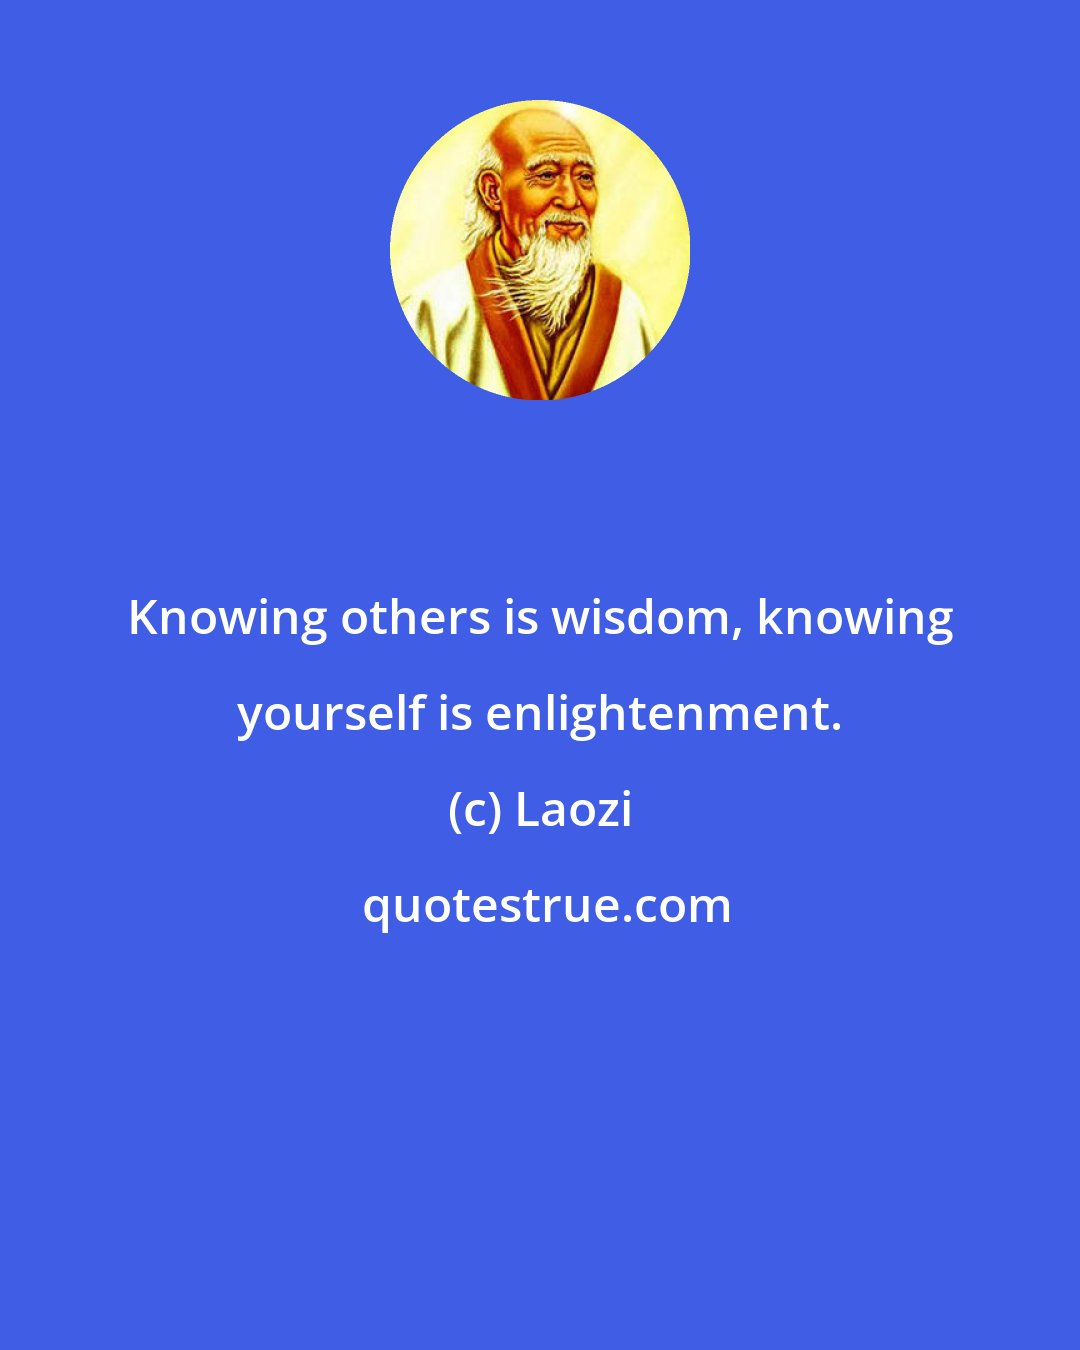 Laozi: Knowing others is wisdom, knowing yourself is enlightenment.